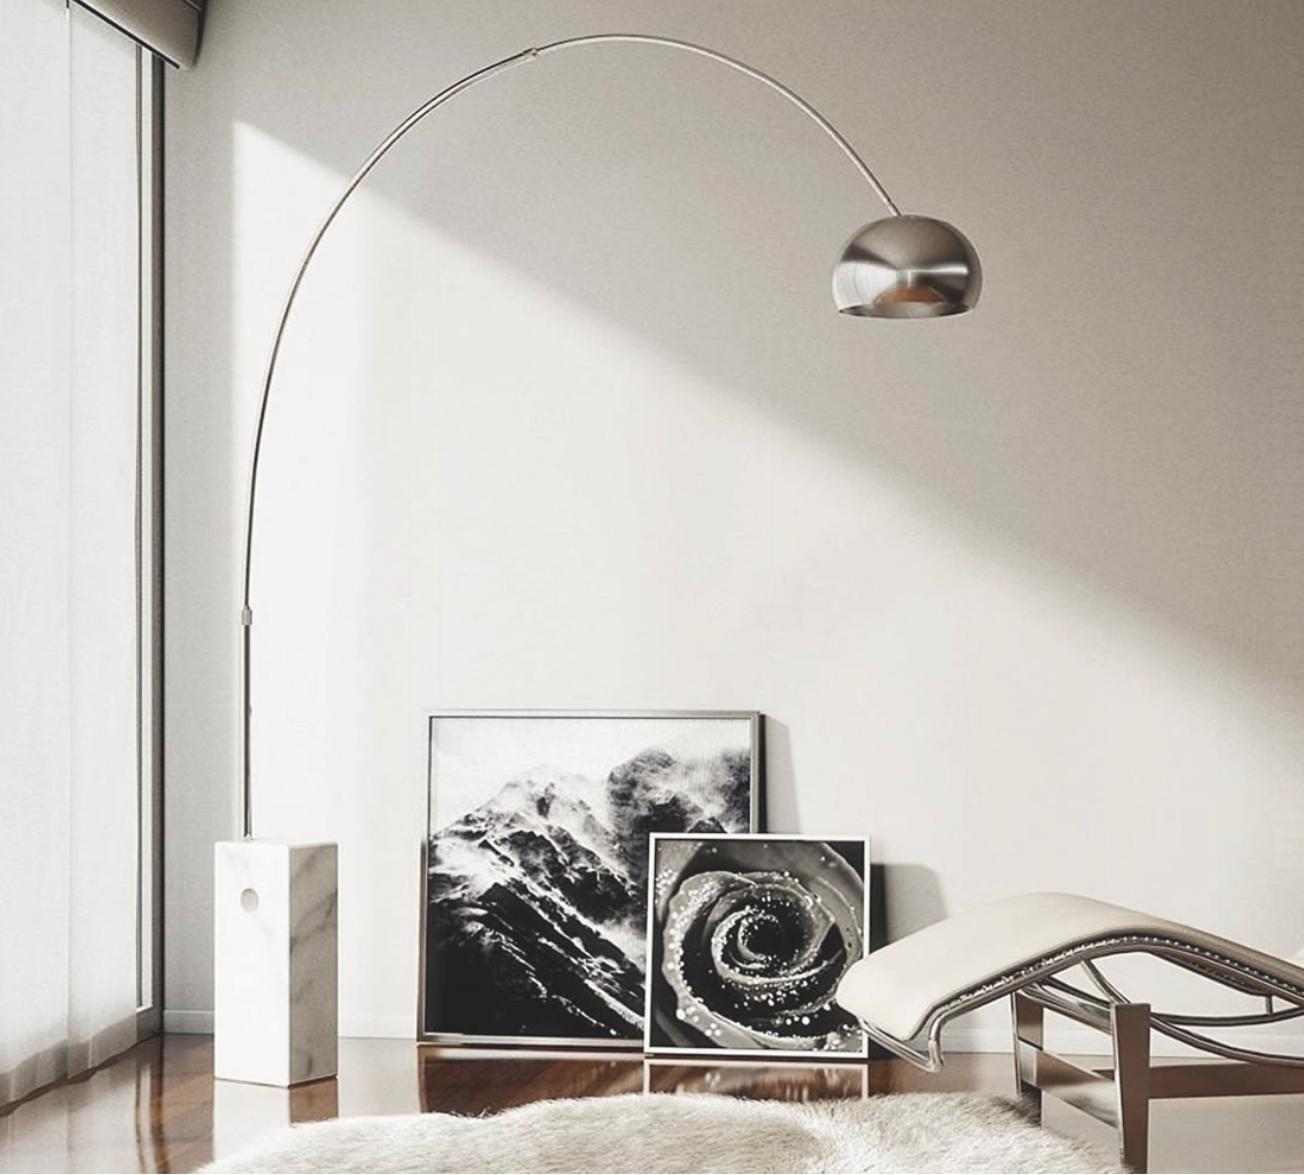 Arco Lamp by Achille Castiglioni for Flos, Italian Mid-Century Modern 1962 Italy 3